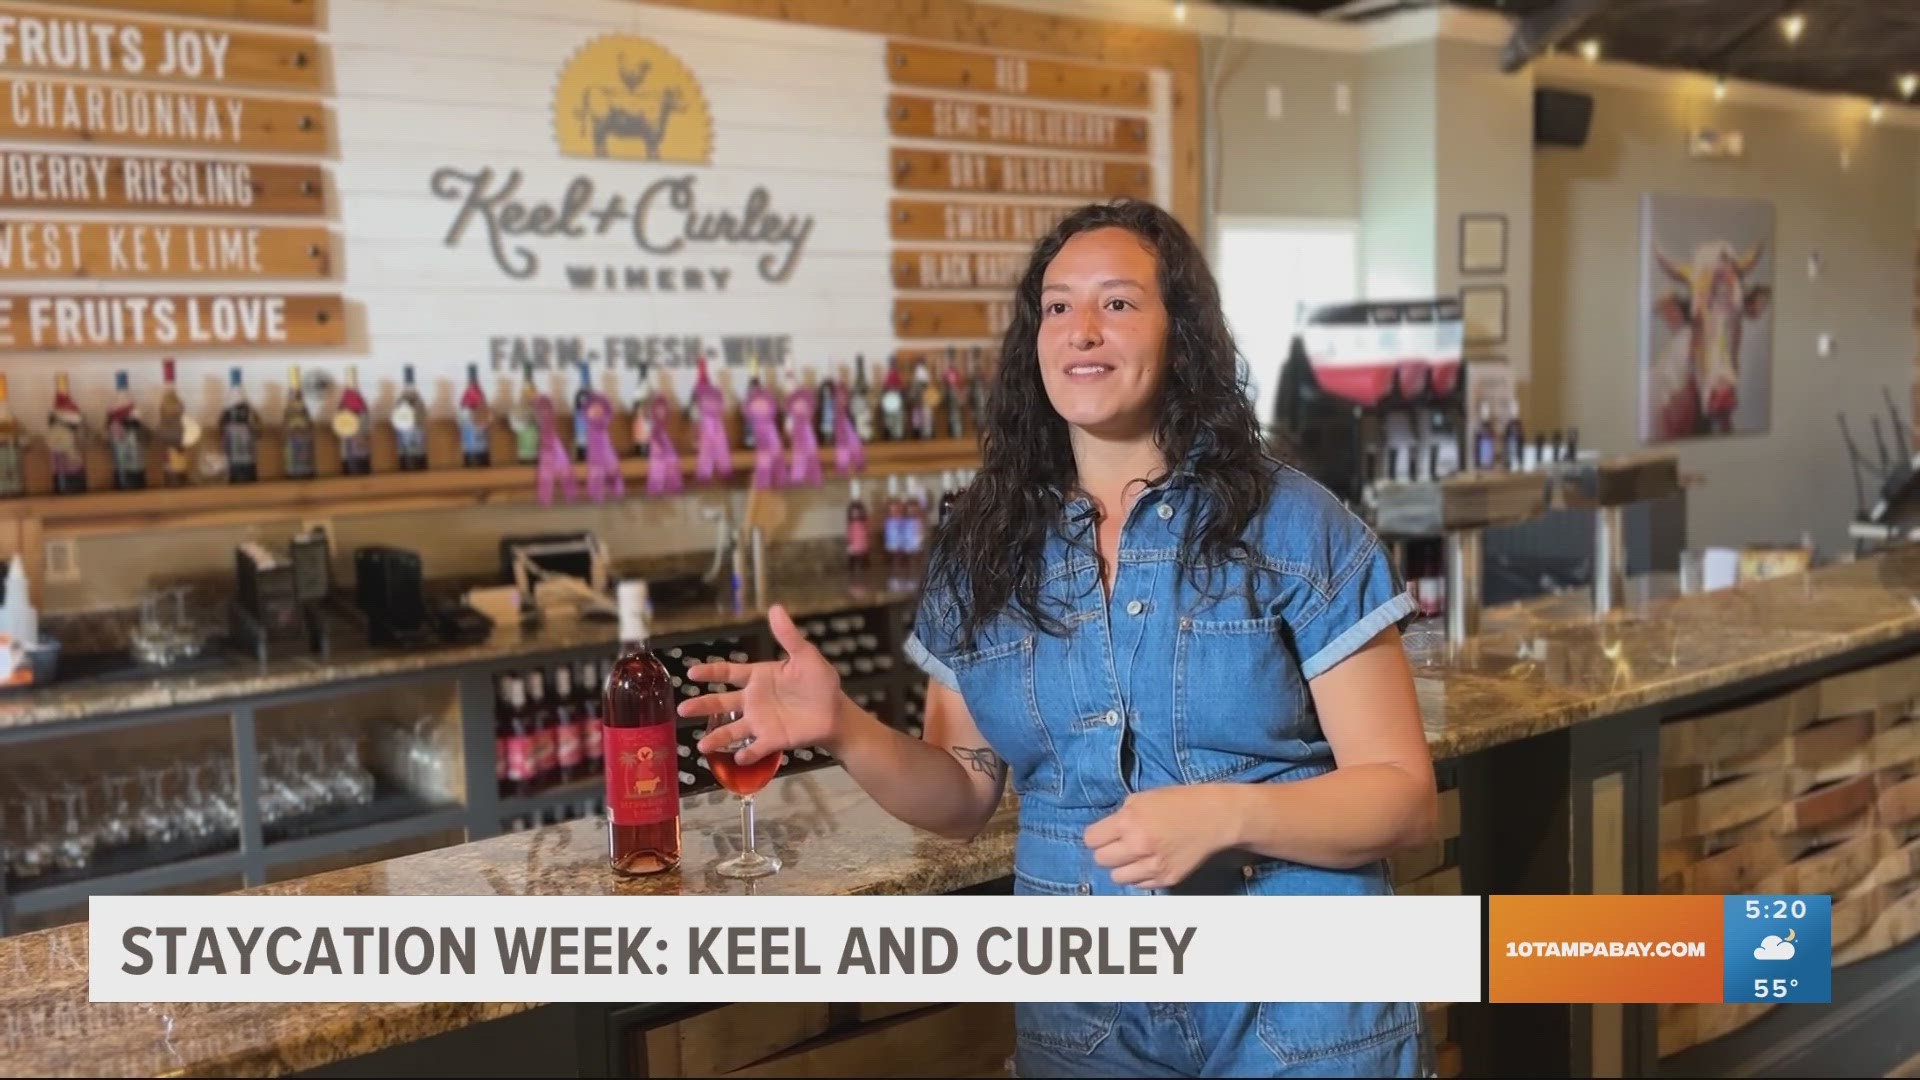 Keel Farms is open every day and has tours of its Keel and Curley Winery.